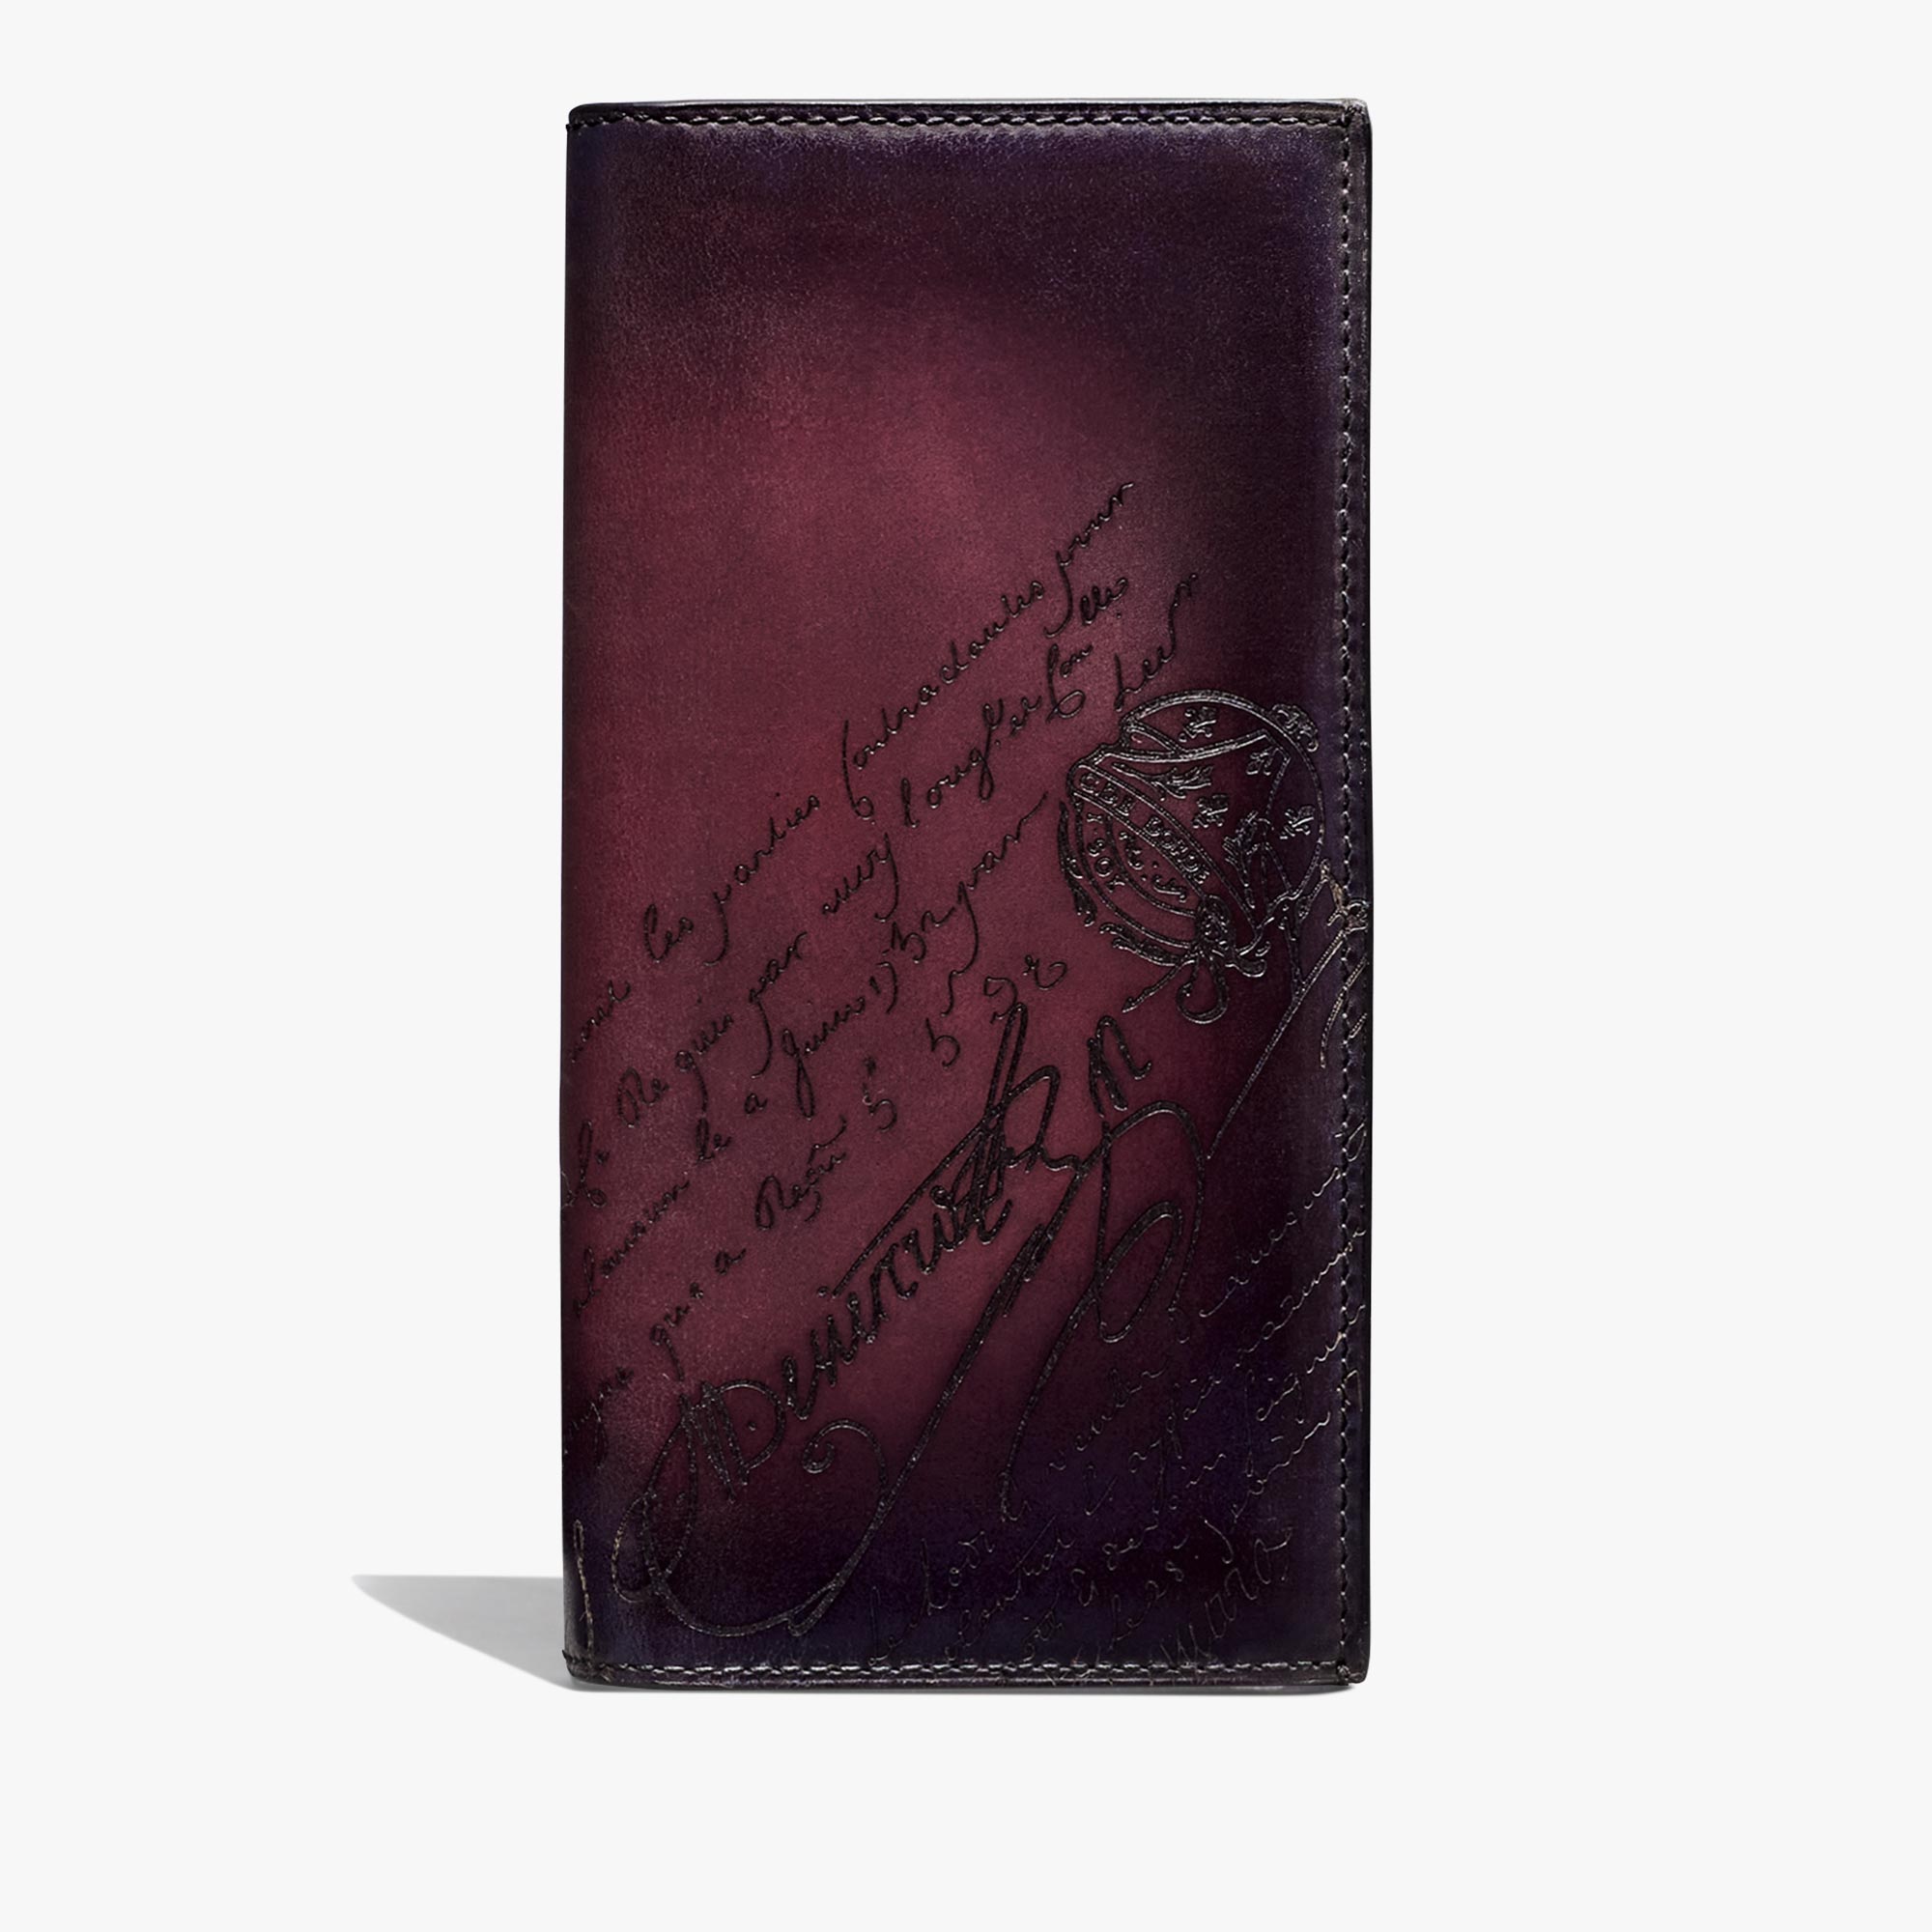 Espace Scritto Leather Long Wallet, GRAPES, hi-res